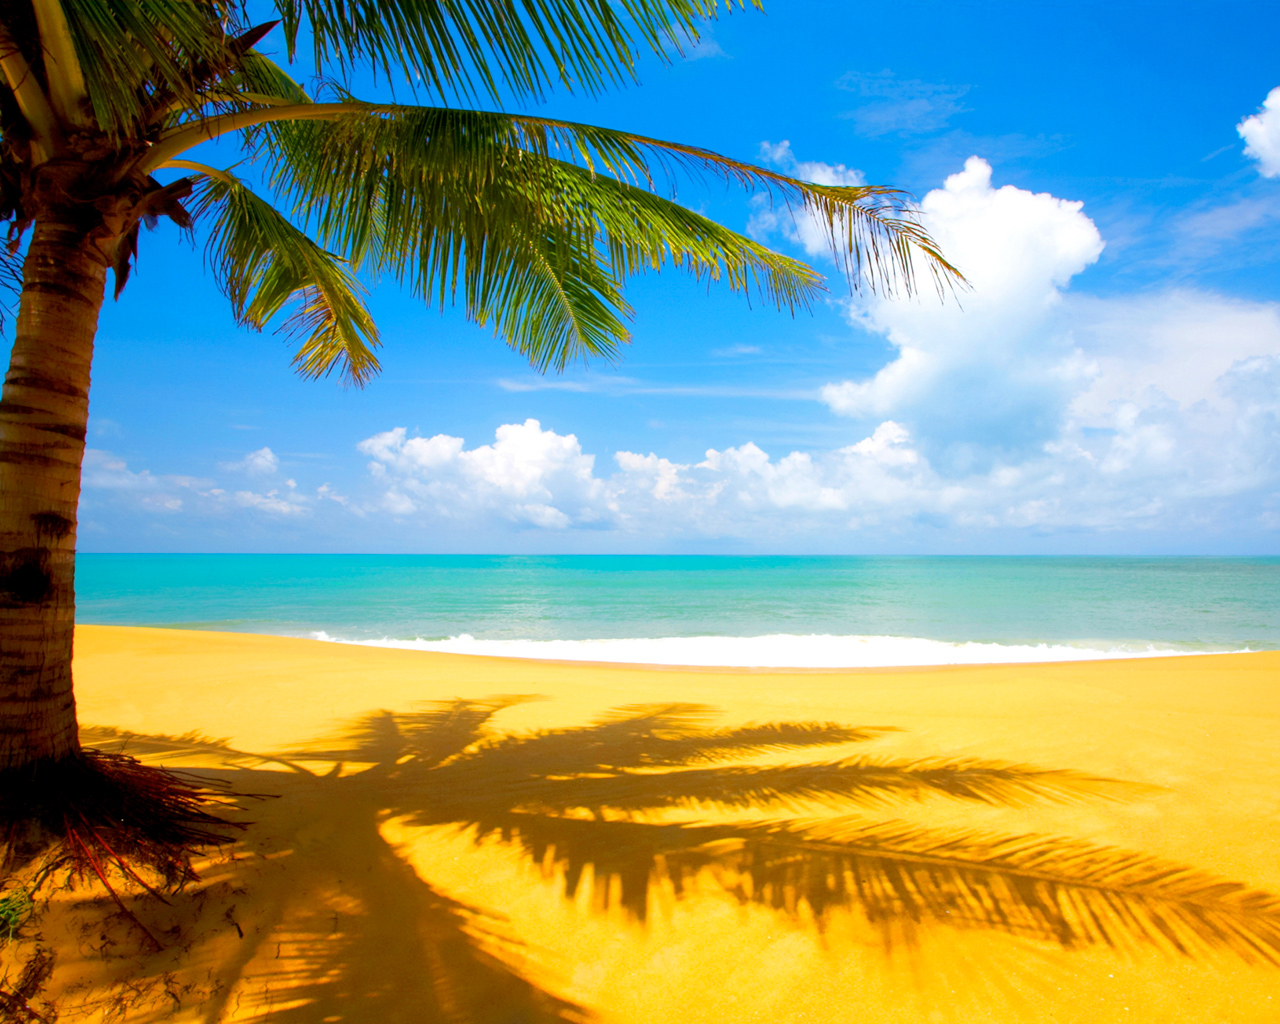 Summer Background Images - HD Wallpapers Lovely